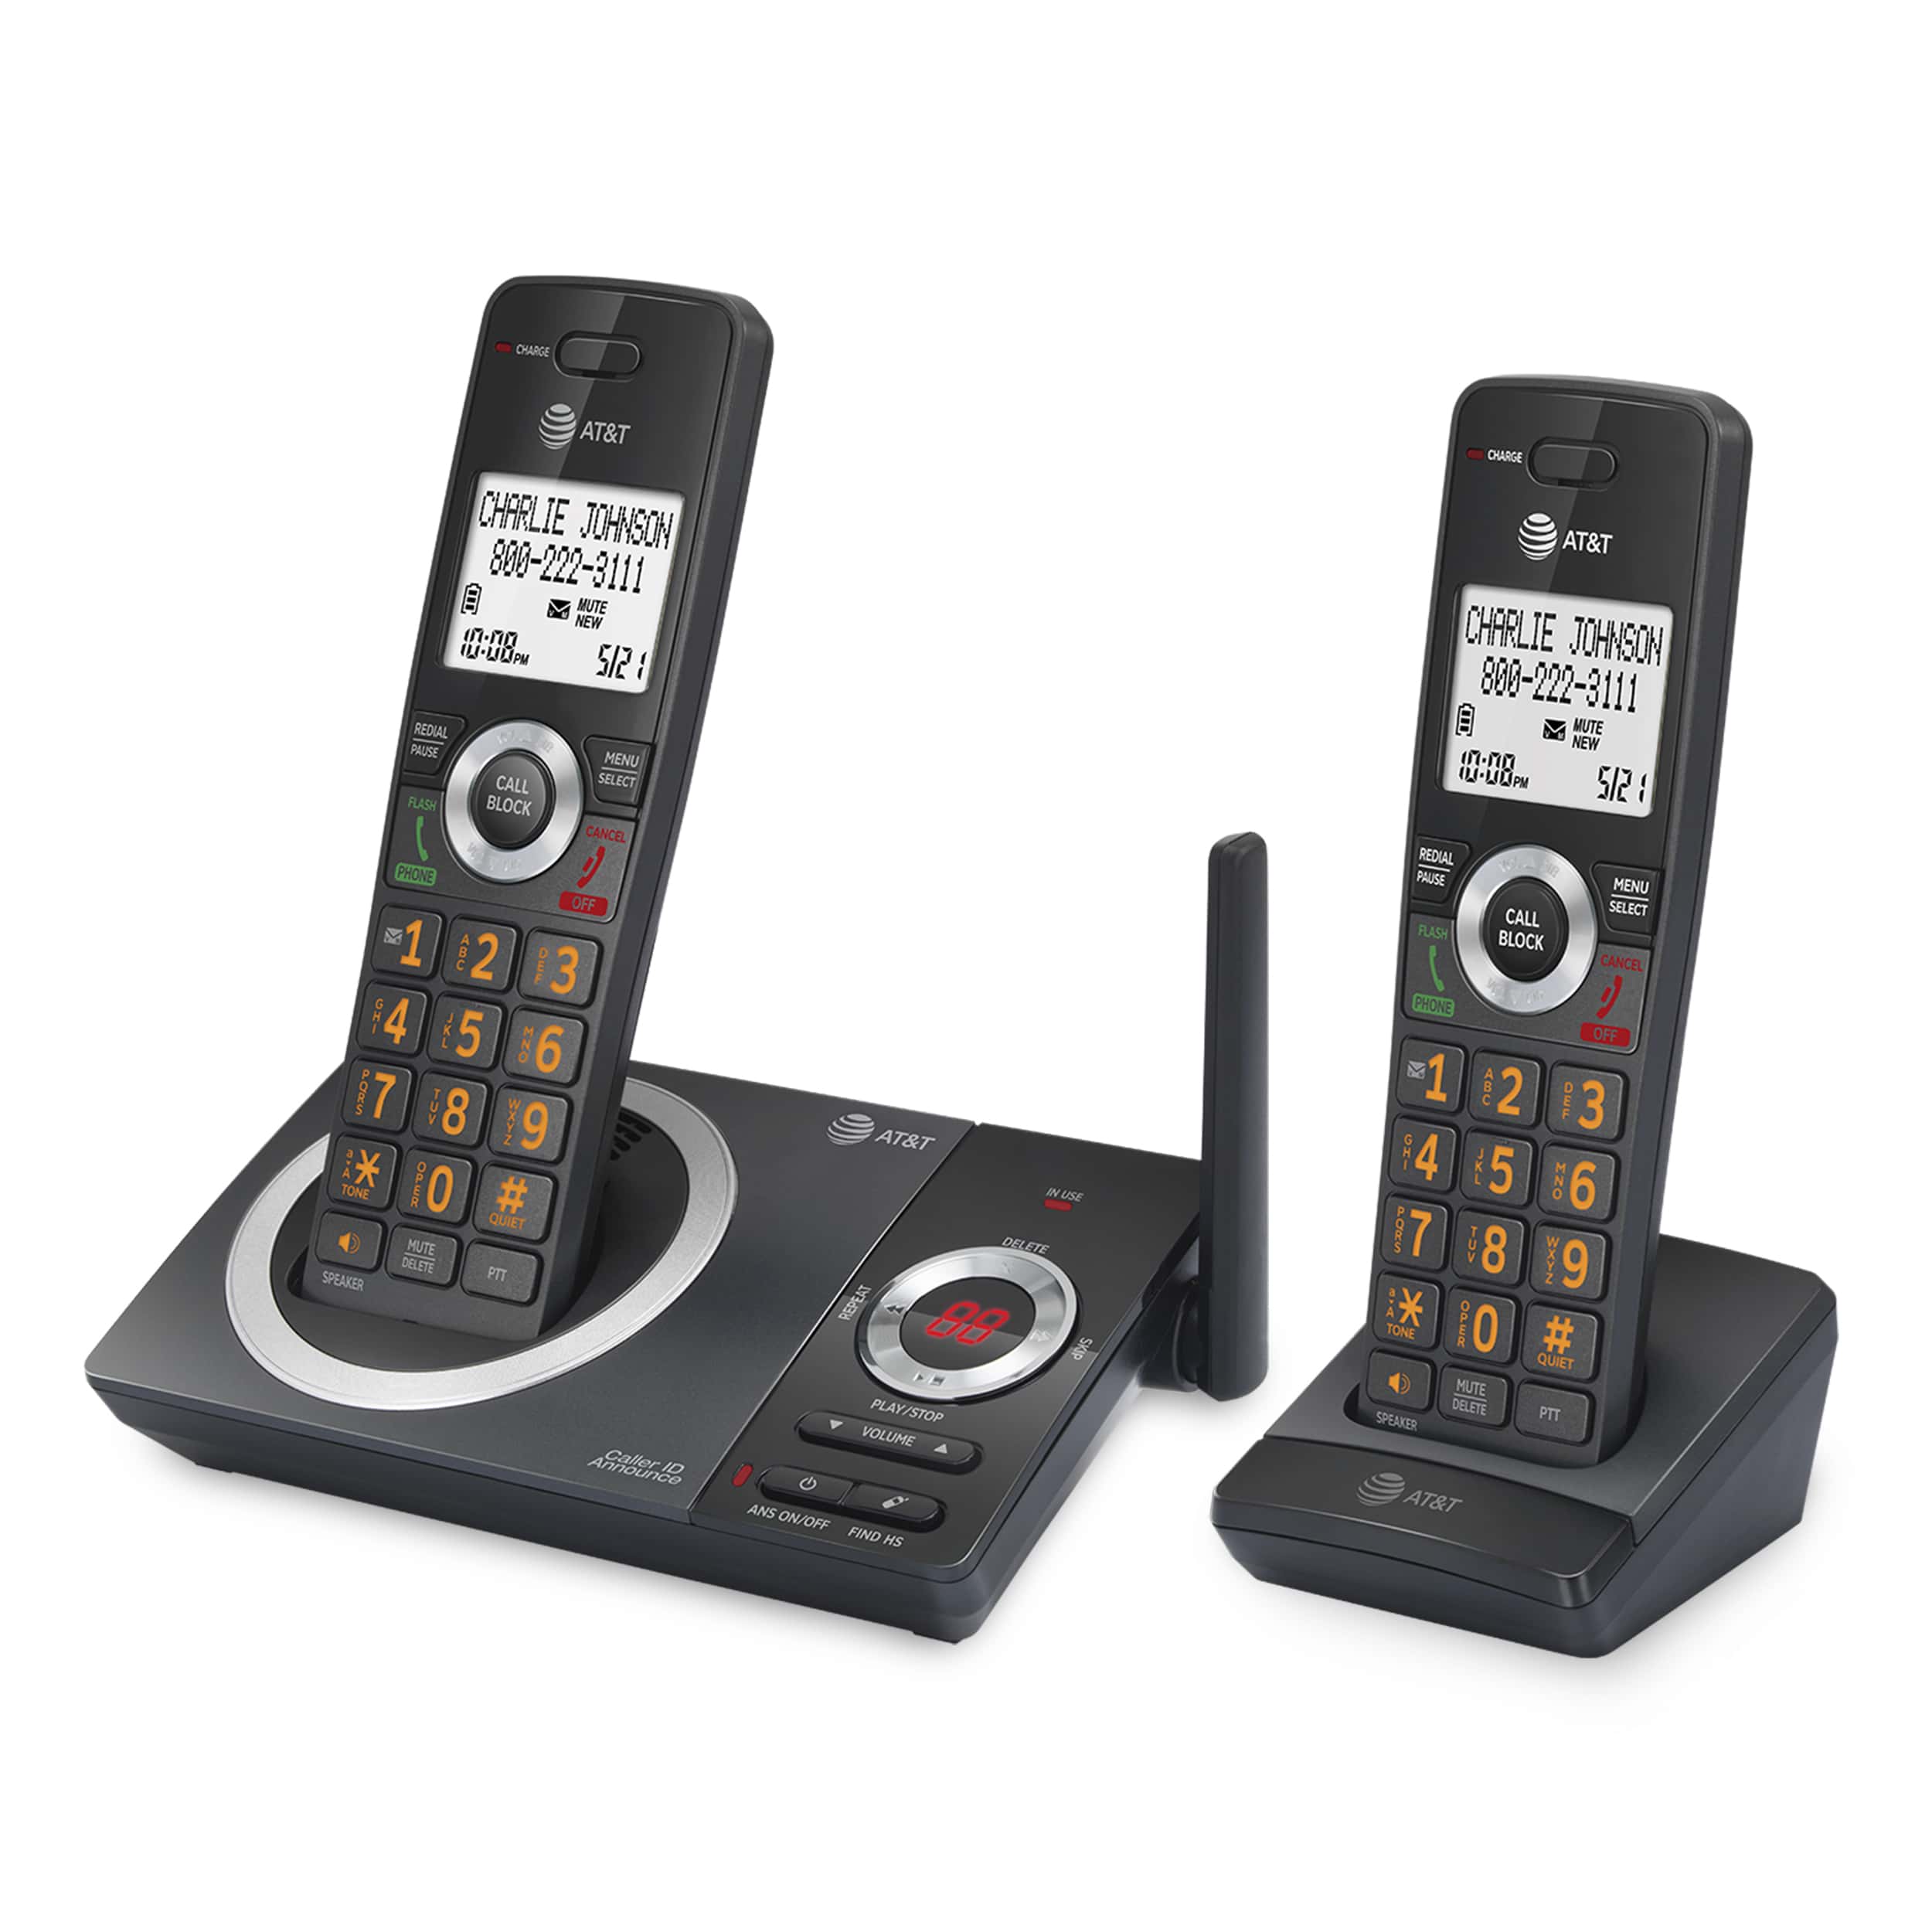 2-Handset Expandable Cordless Phone with Unsurpassed Range, Smart Call Blocker and Answering System - view 2